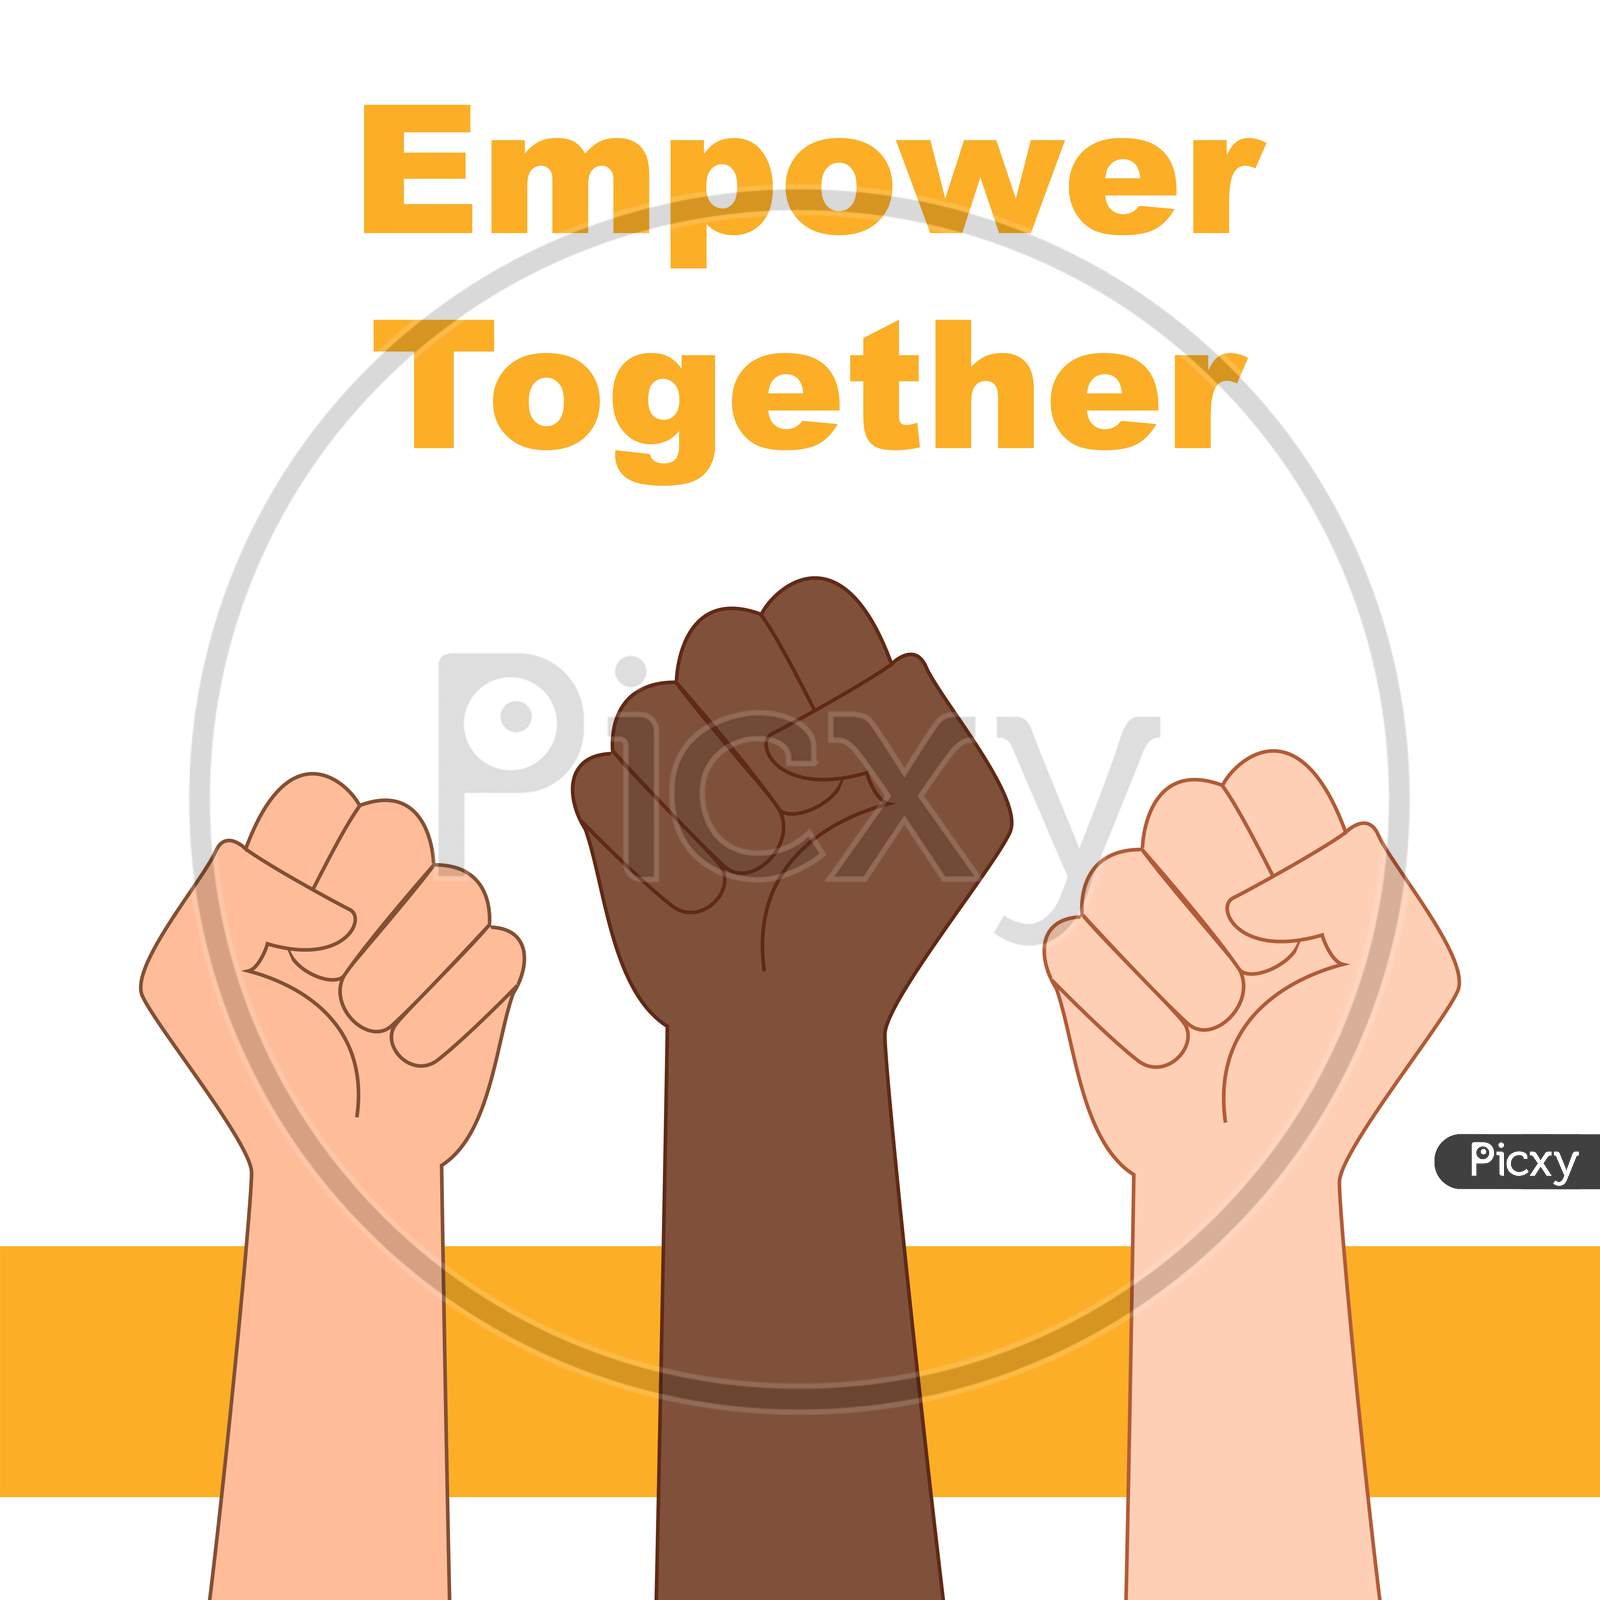 Empower together hand icon |People empowered